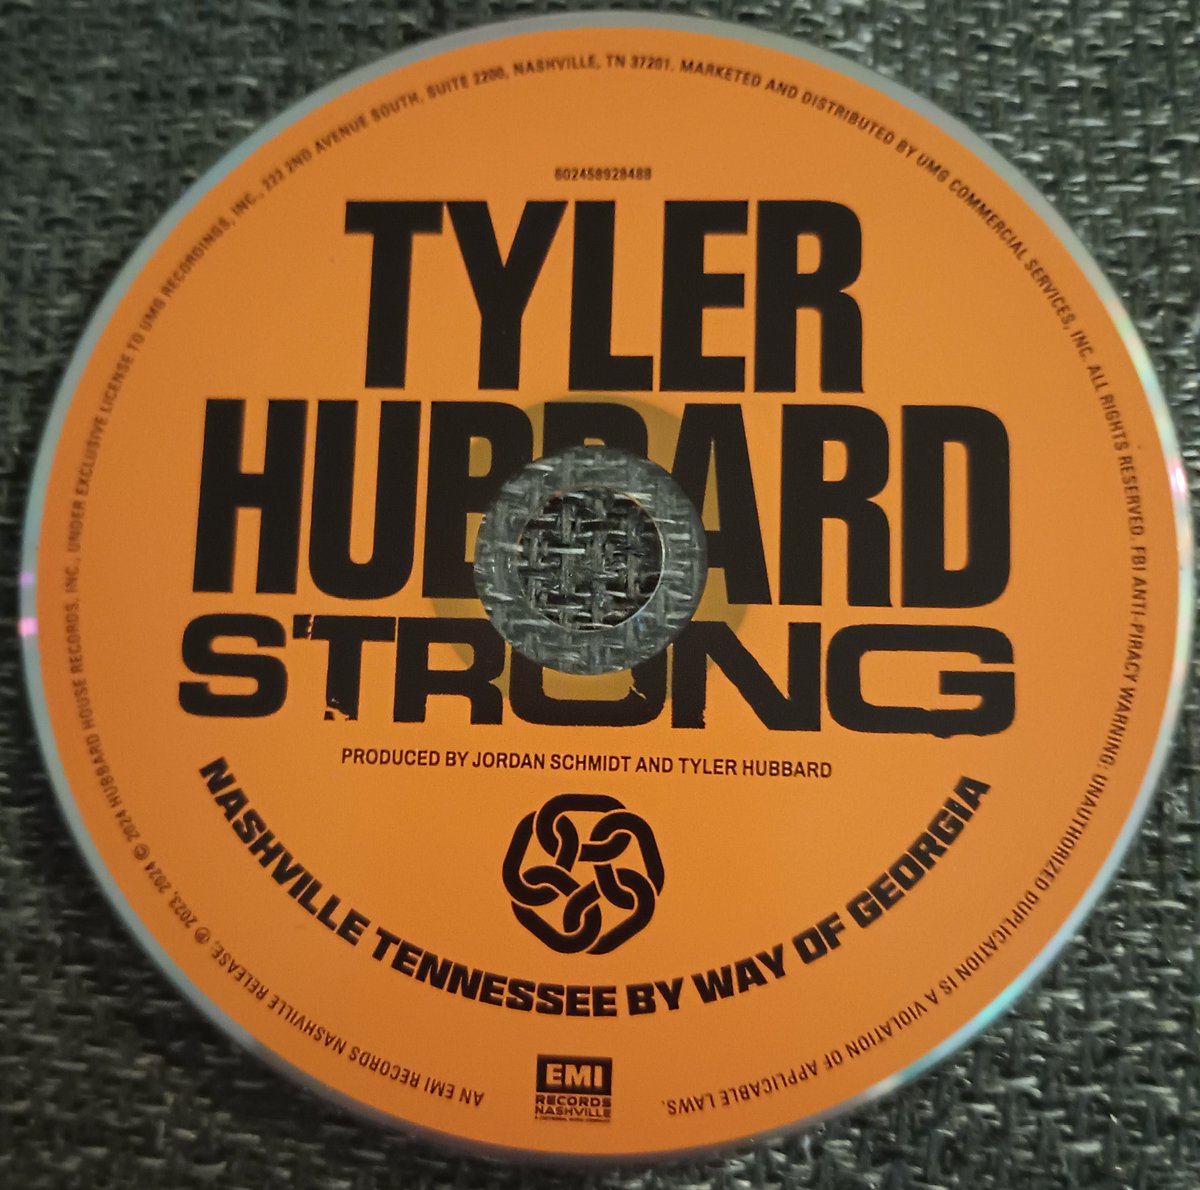 #countrymusic #country #music #artistspotlight #tylerhubbard #strong #thereviewissoon